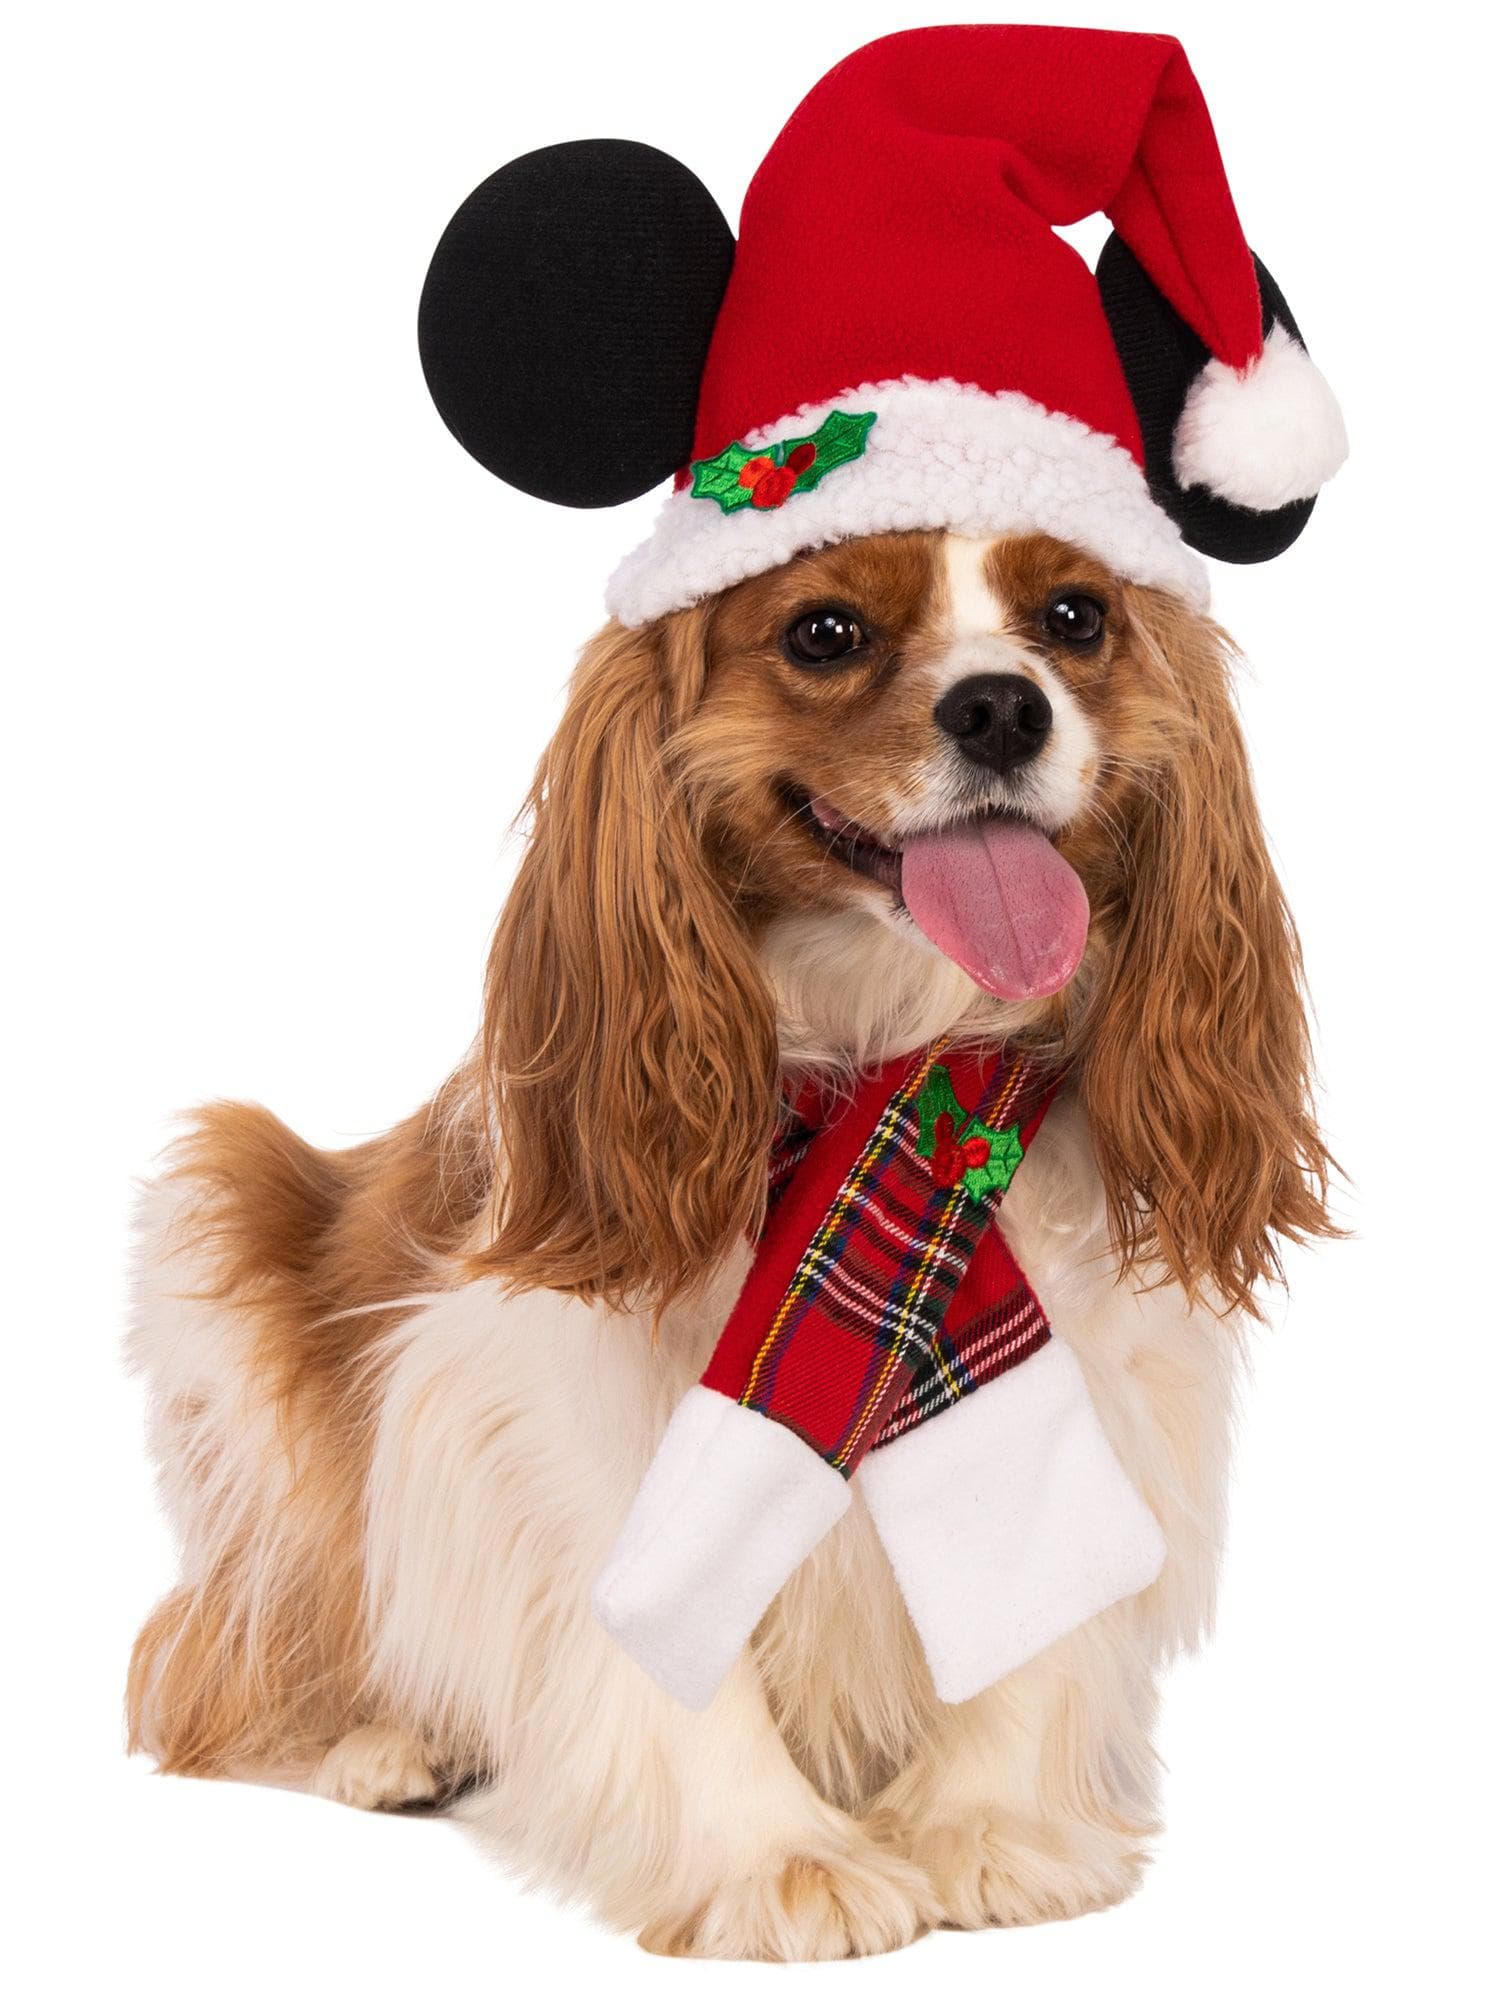 Mickey Mouse Pet Santa Hat and Scarf - costumes.com